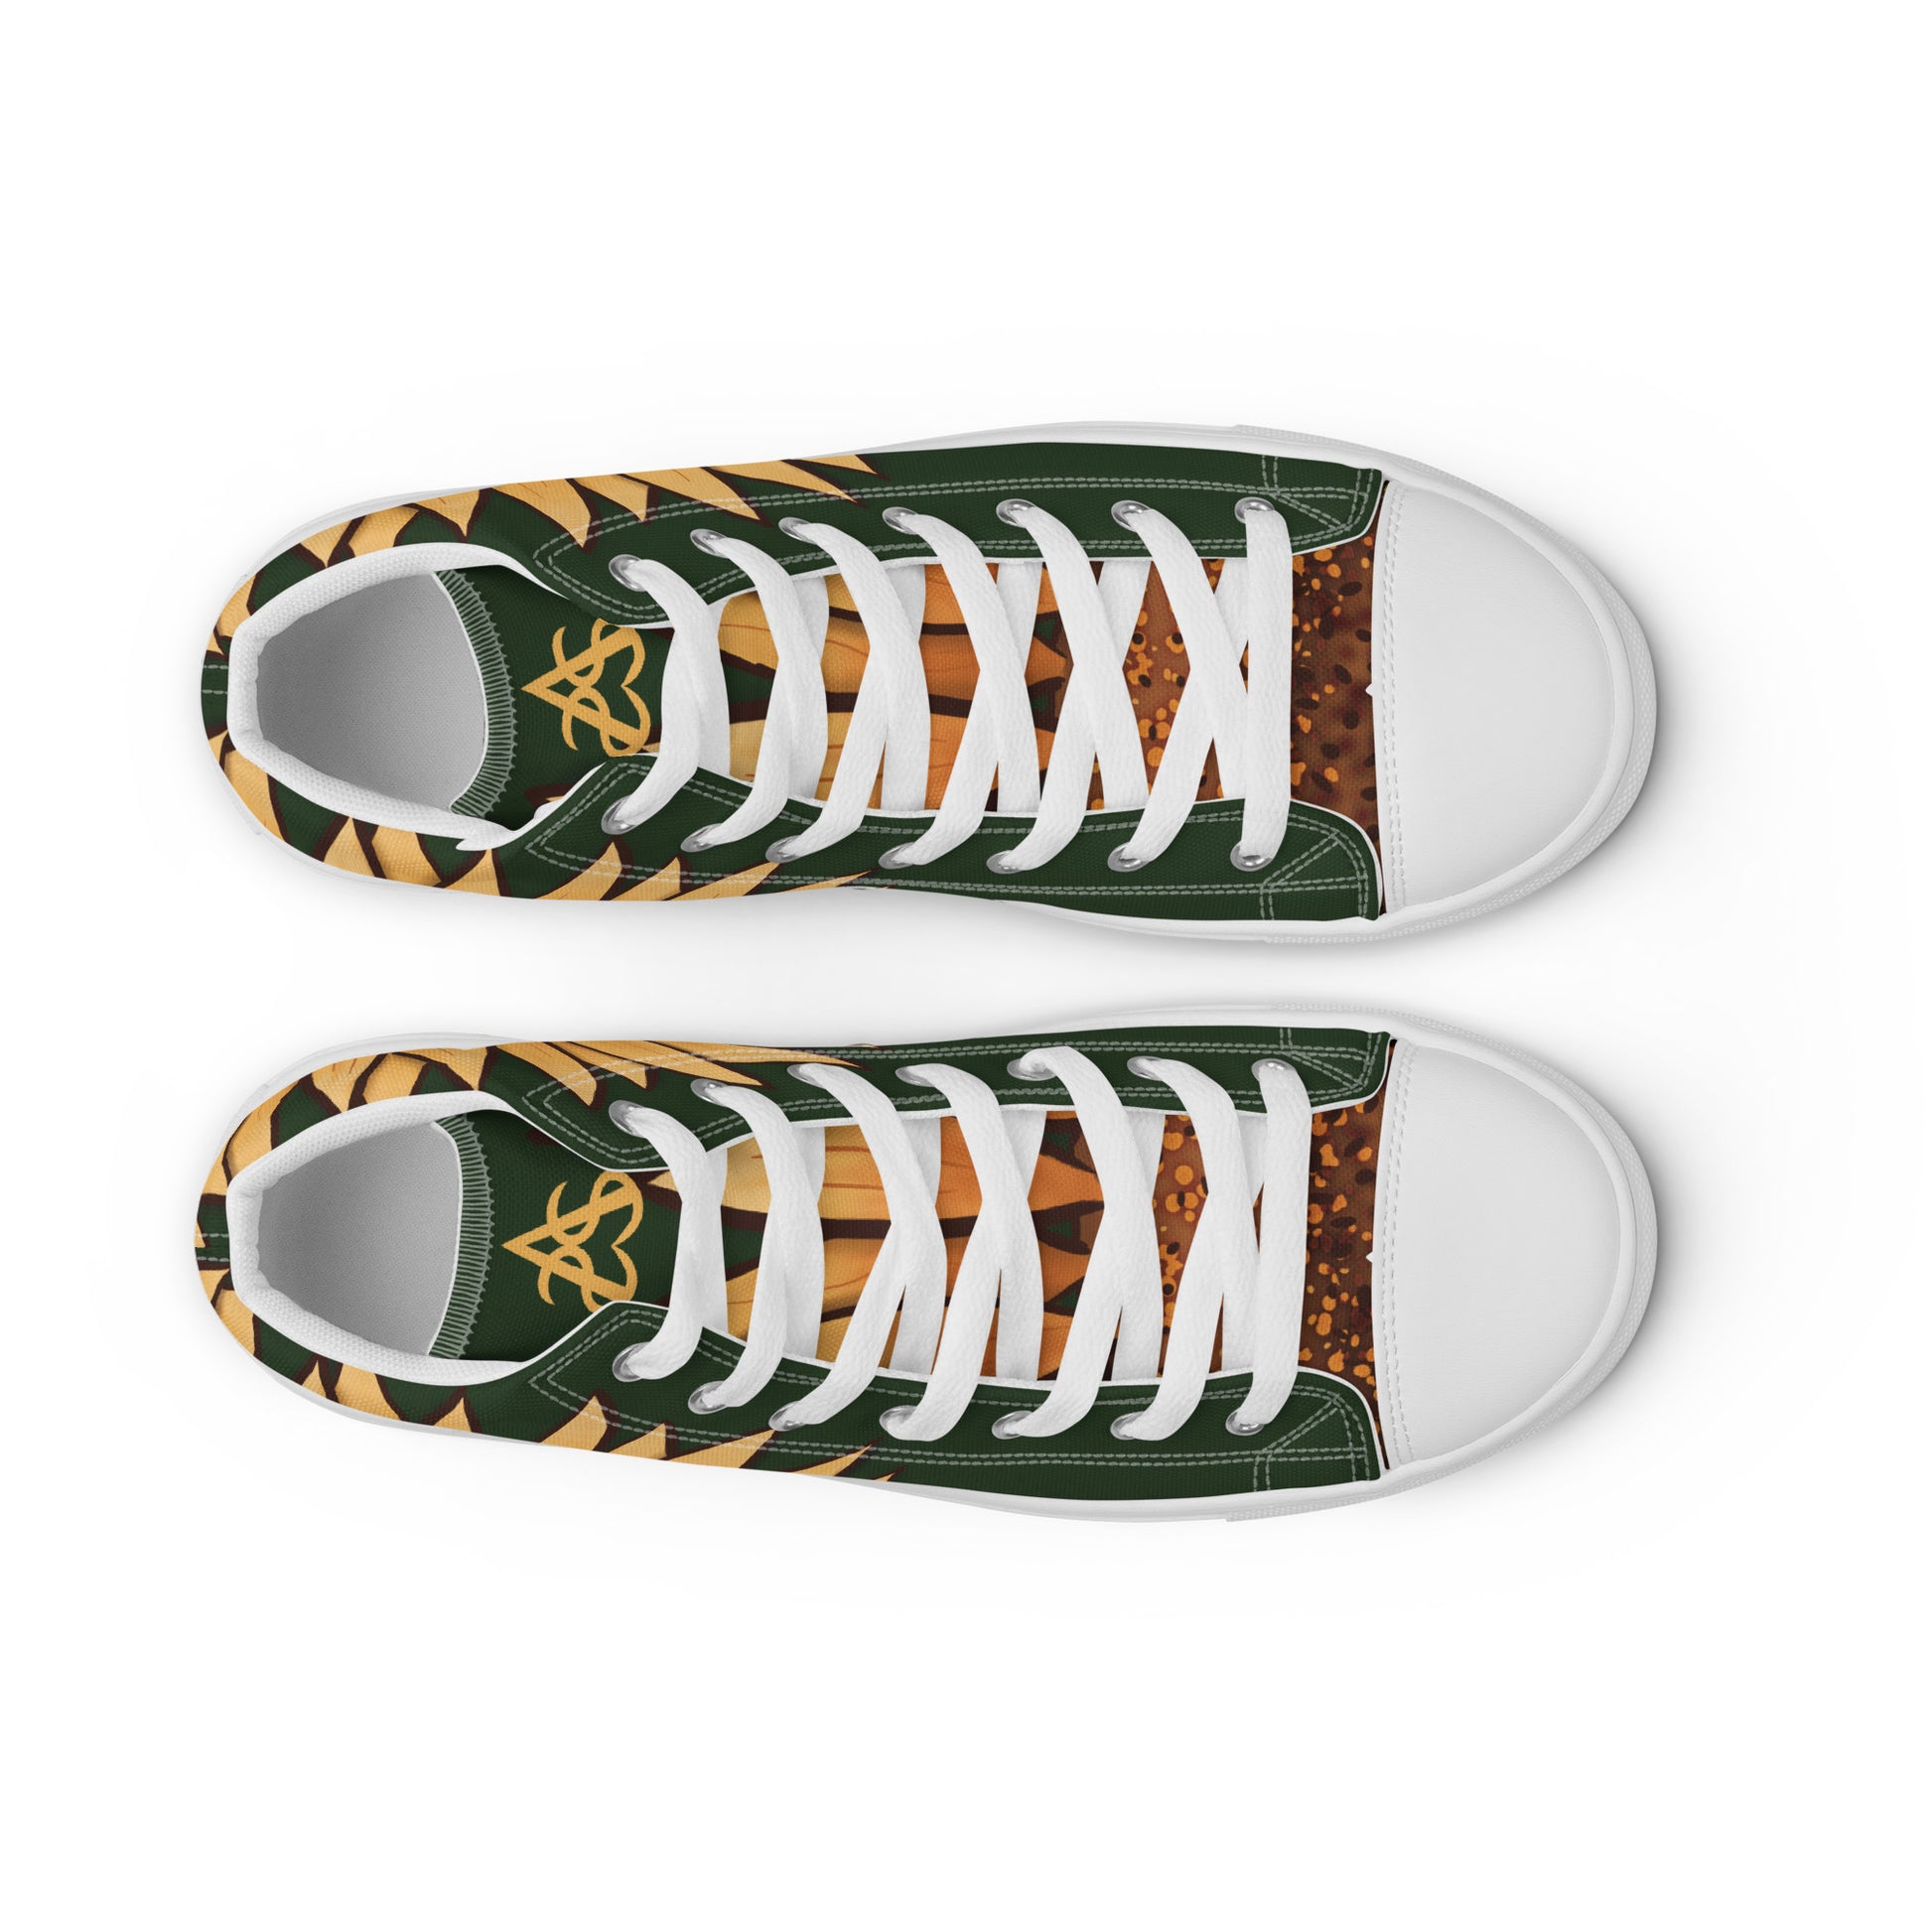 Top view: a dark green high top shoe with a large sunflower painting on the side, the middle starting around the heel and the petals wrapping around the side of the shoe, almost to the laces.